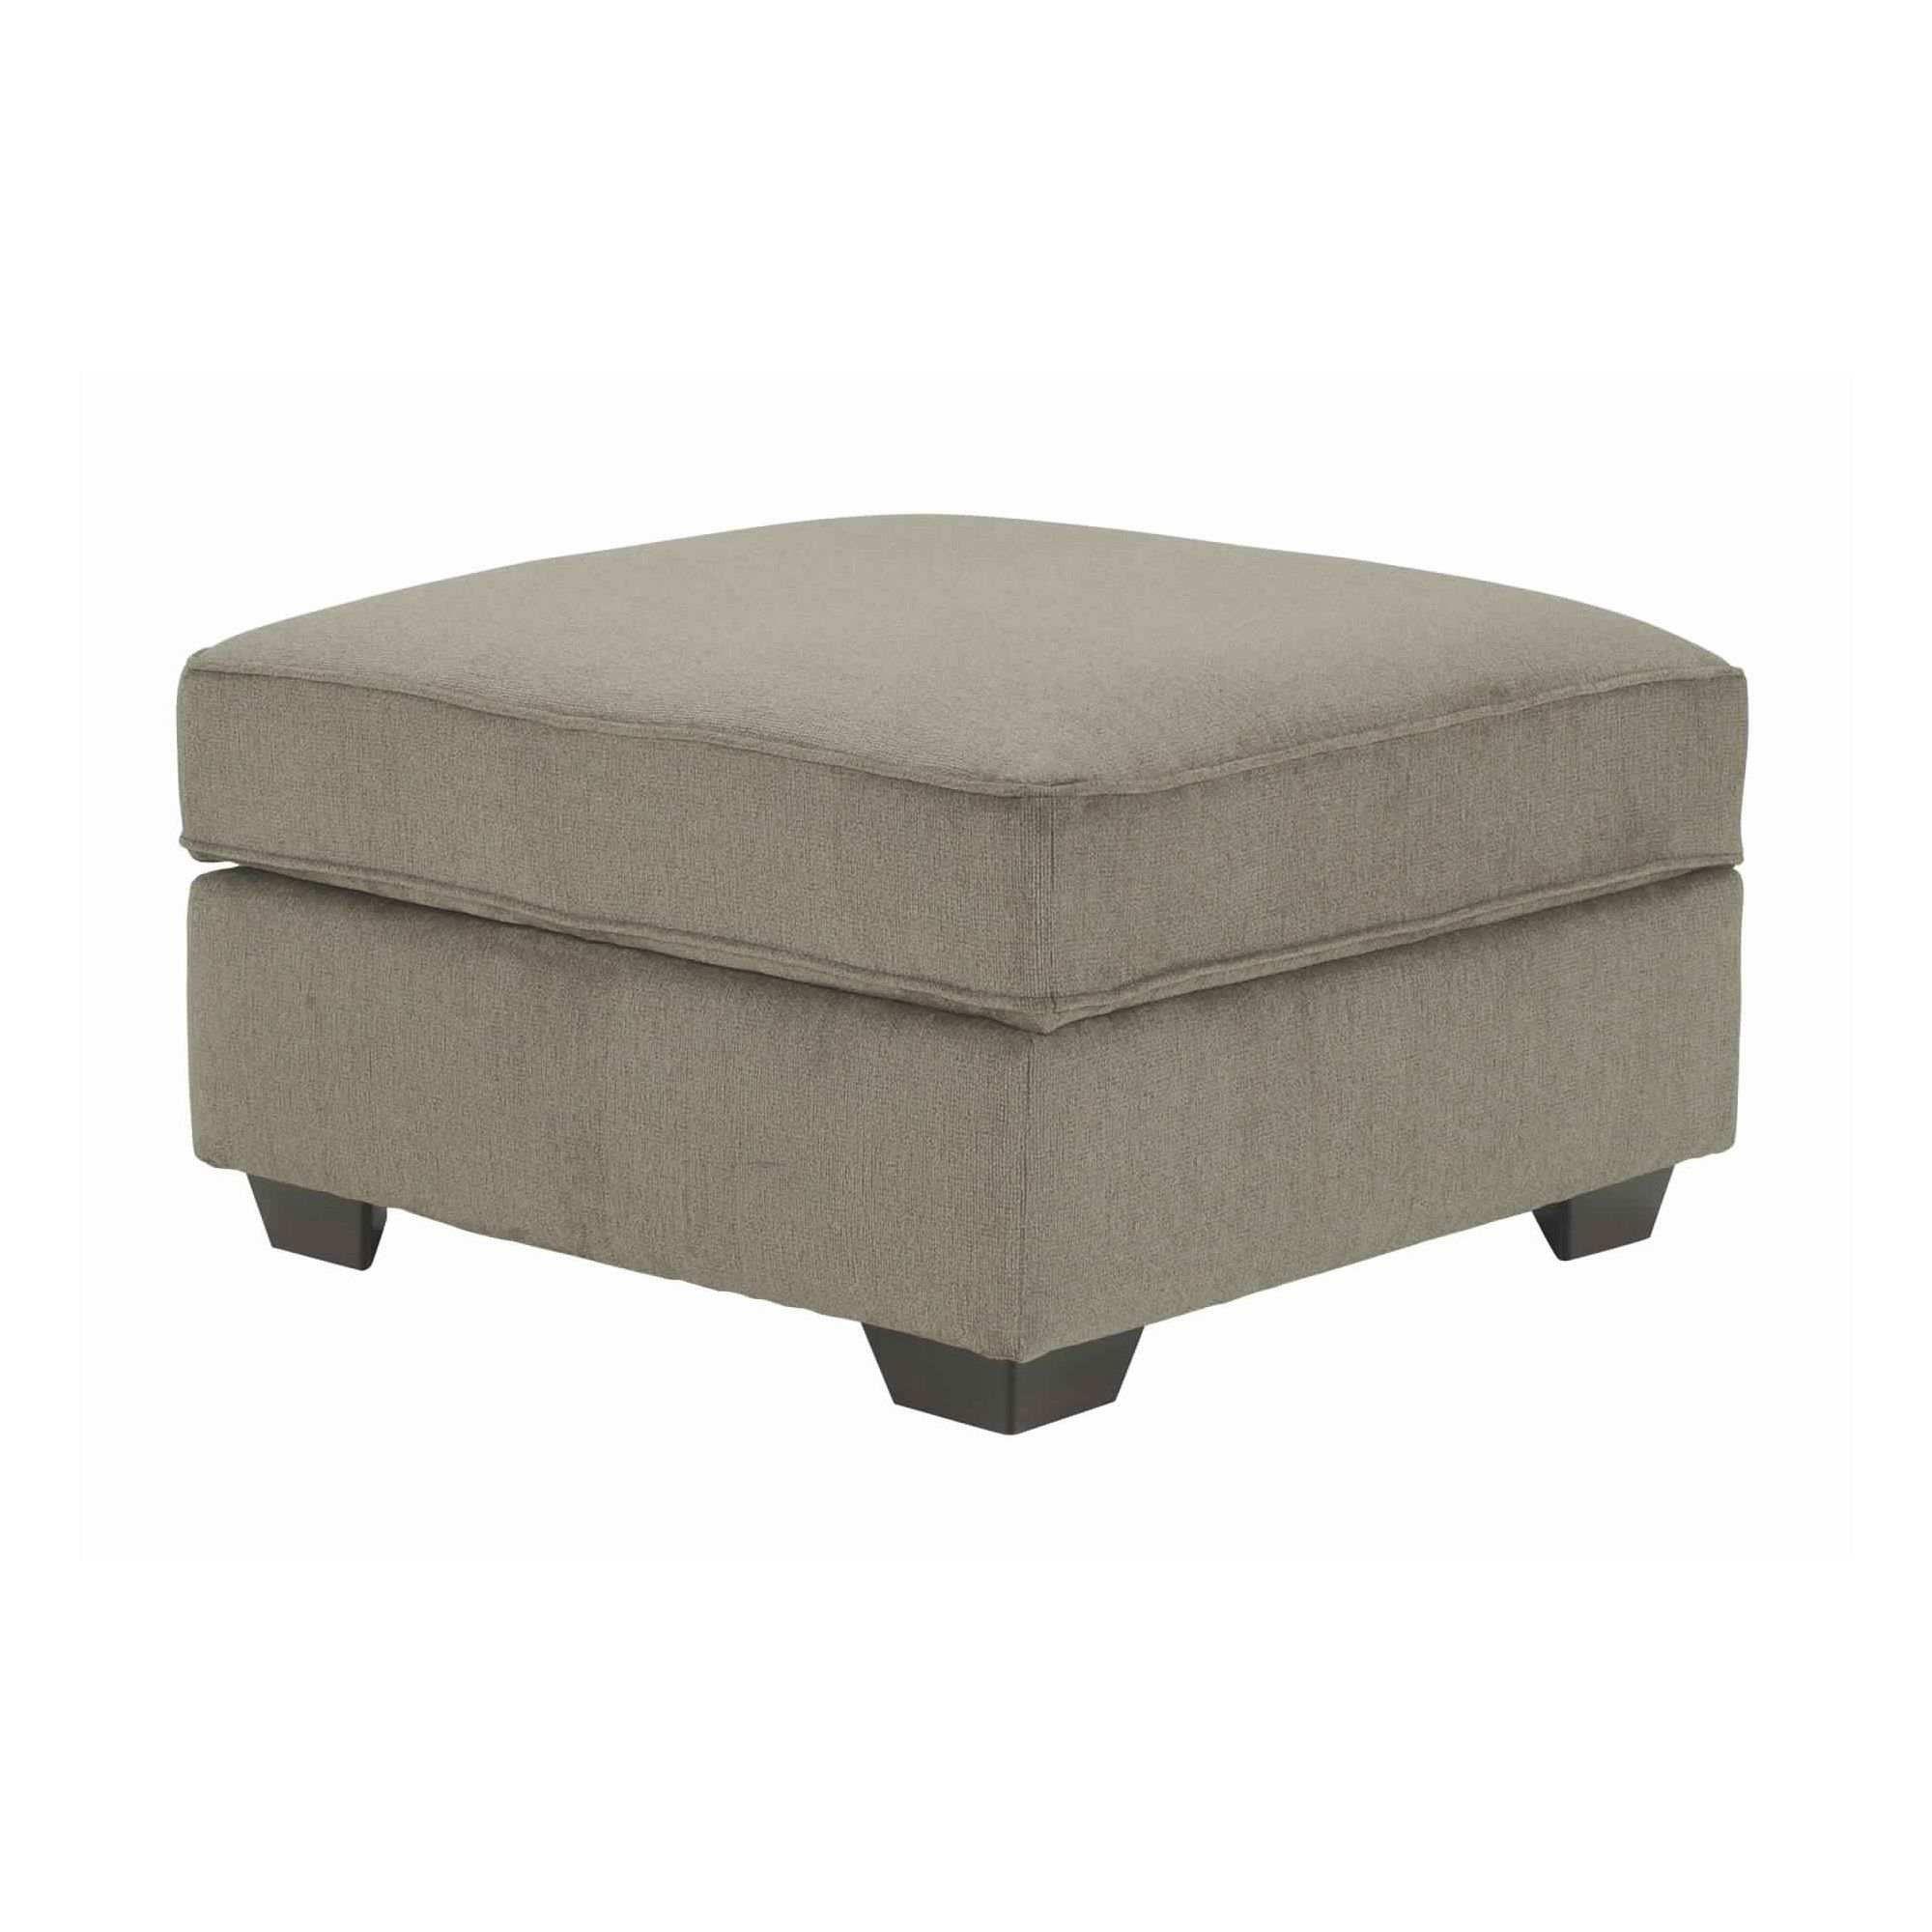 2017 Fabric Upholstered Storage Ottoman With Tapered Legs, Taupe Gray Inside Red Fabric Square Storage Ottomans With Pillows (View 2 of 10)